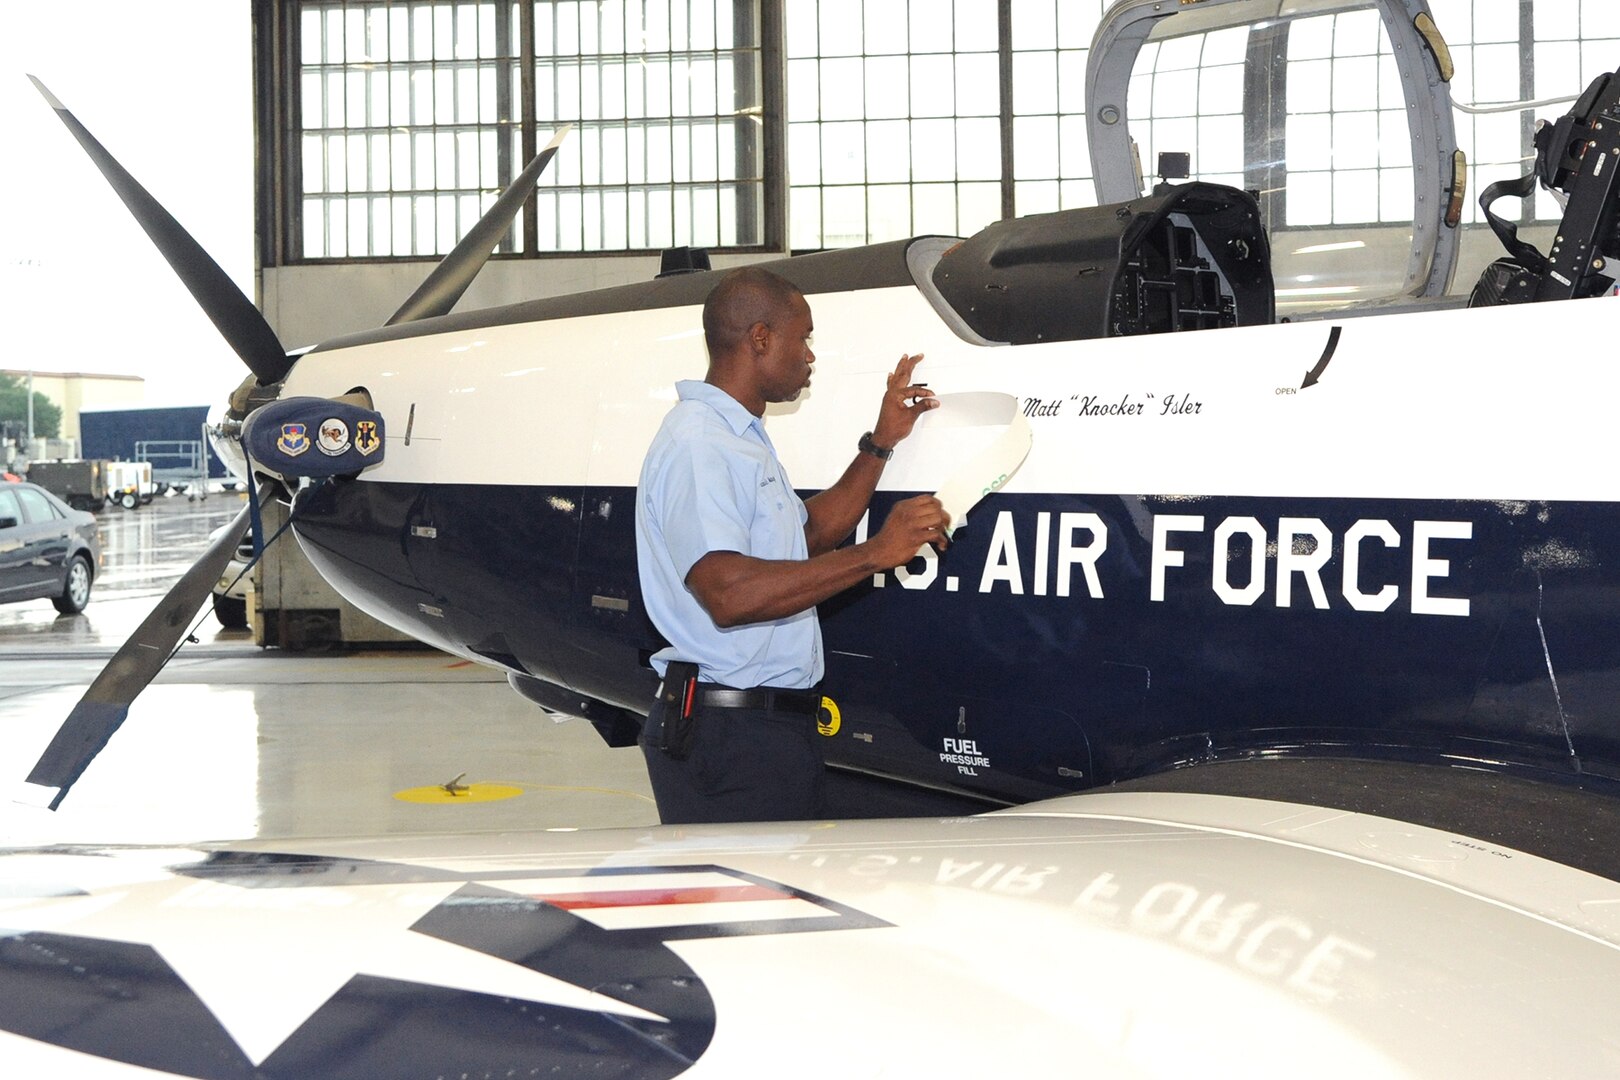 Mr. Louis Marcy, a member of the 12th Flying Training Wing Maintenance Directorate, unveils Col. Matthew C. Isler's name on a T-6 aircraft during the change of command ceremony here June 25. As part of an Air Force tradition, one of the aircraft is painted with the new commander's name.  (U.S. Air Force photo by Melissa Peterson)